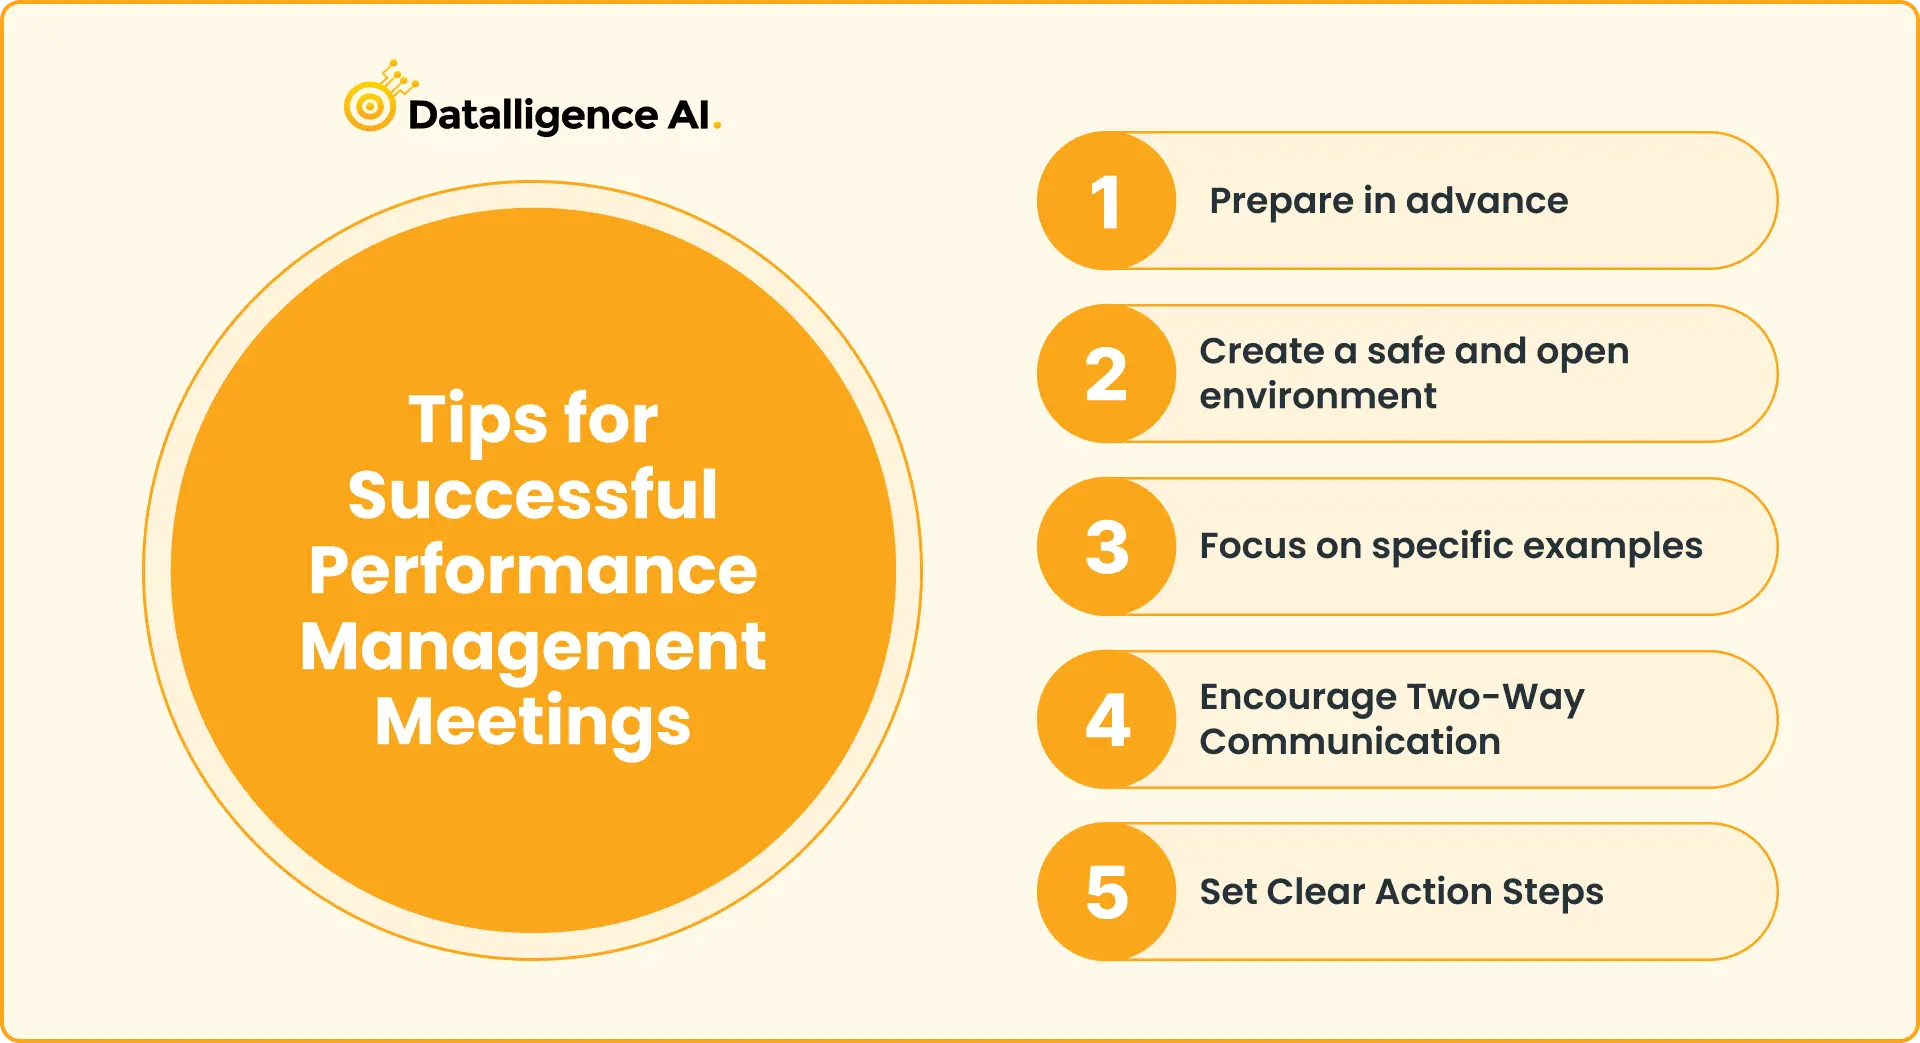 Tips for Successful Performance Management Meetings